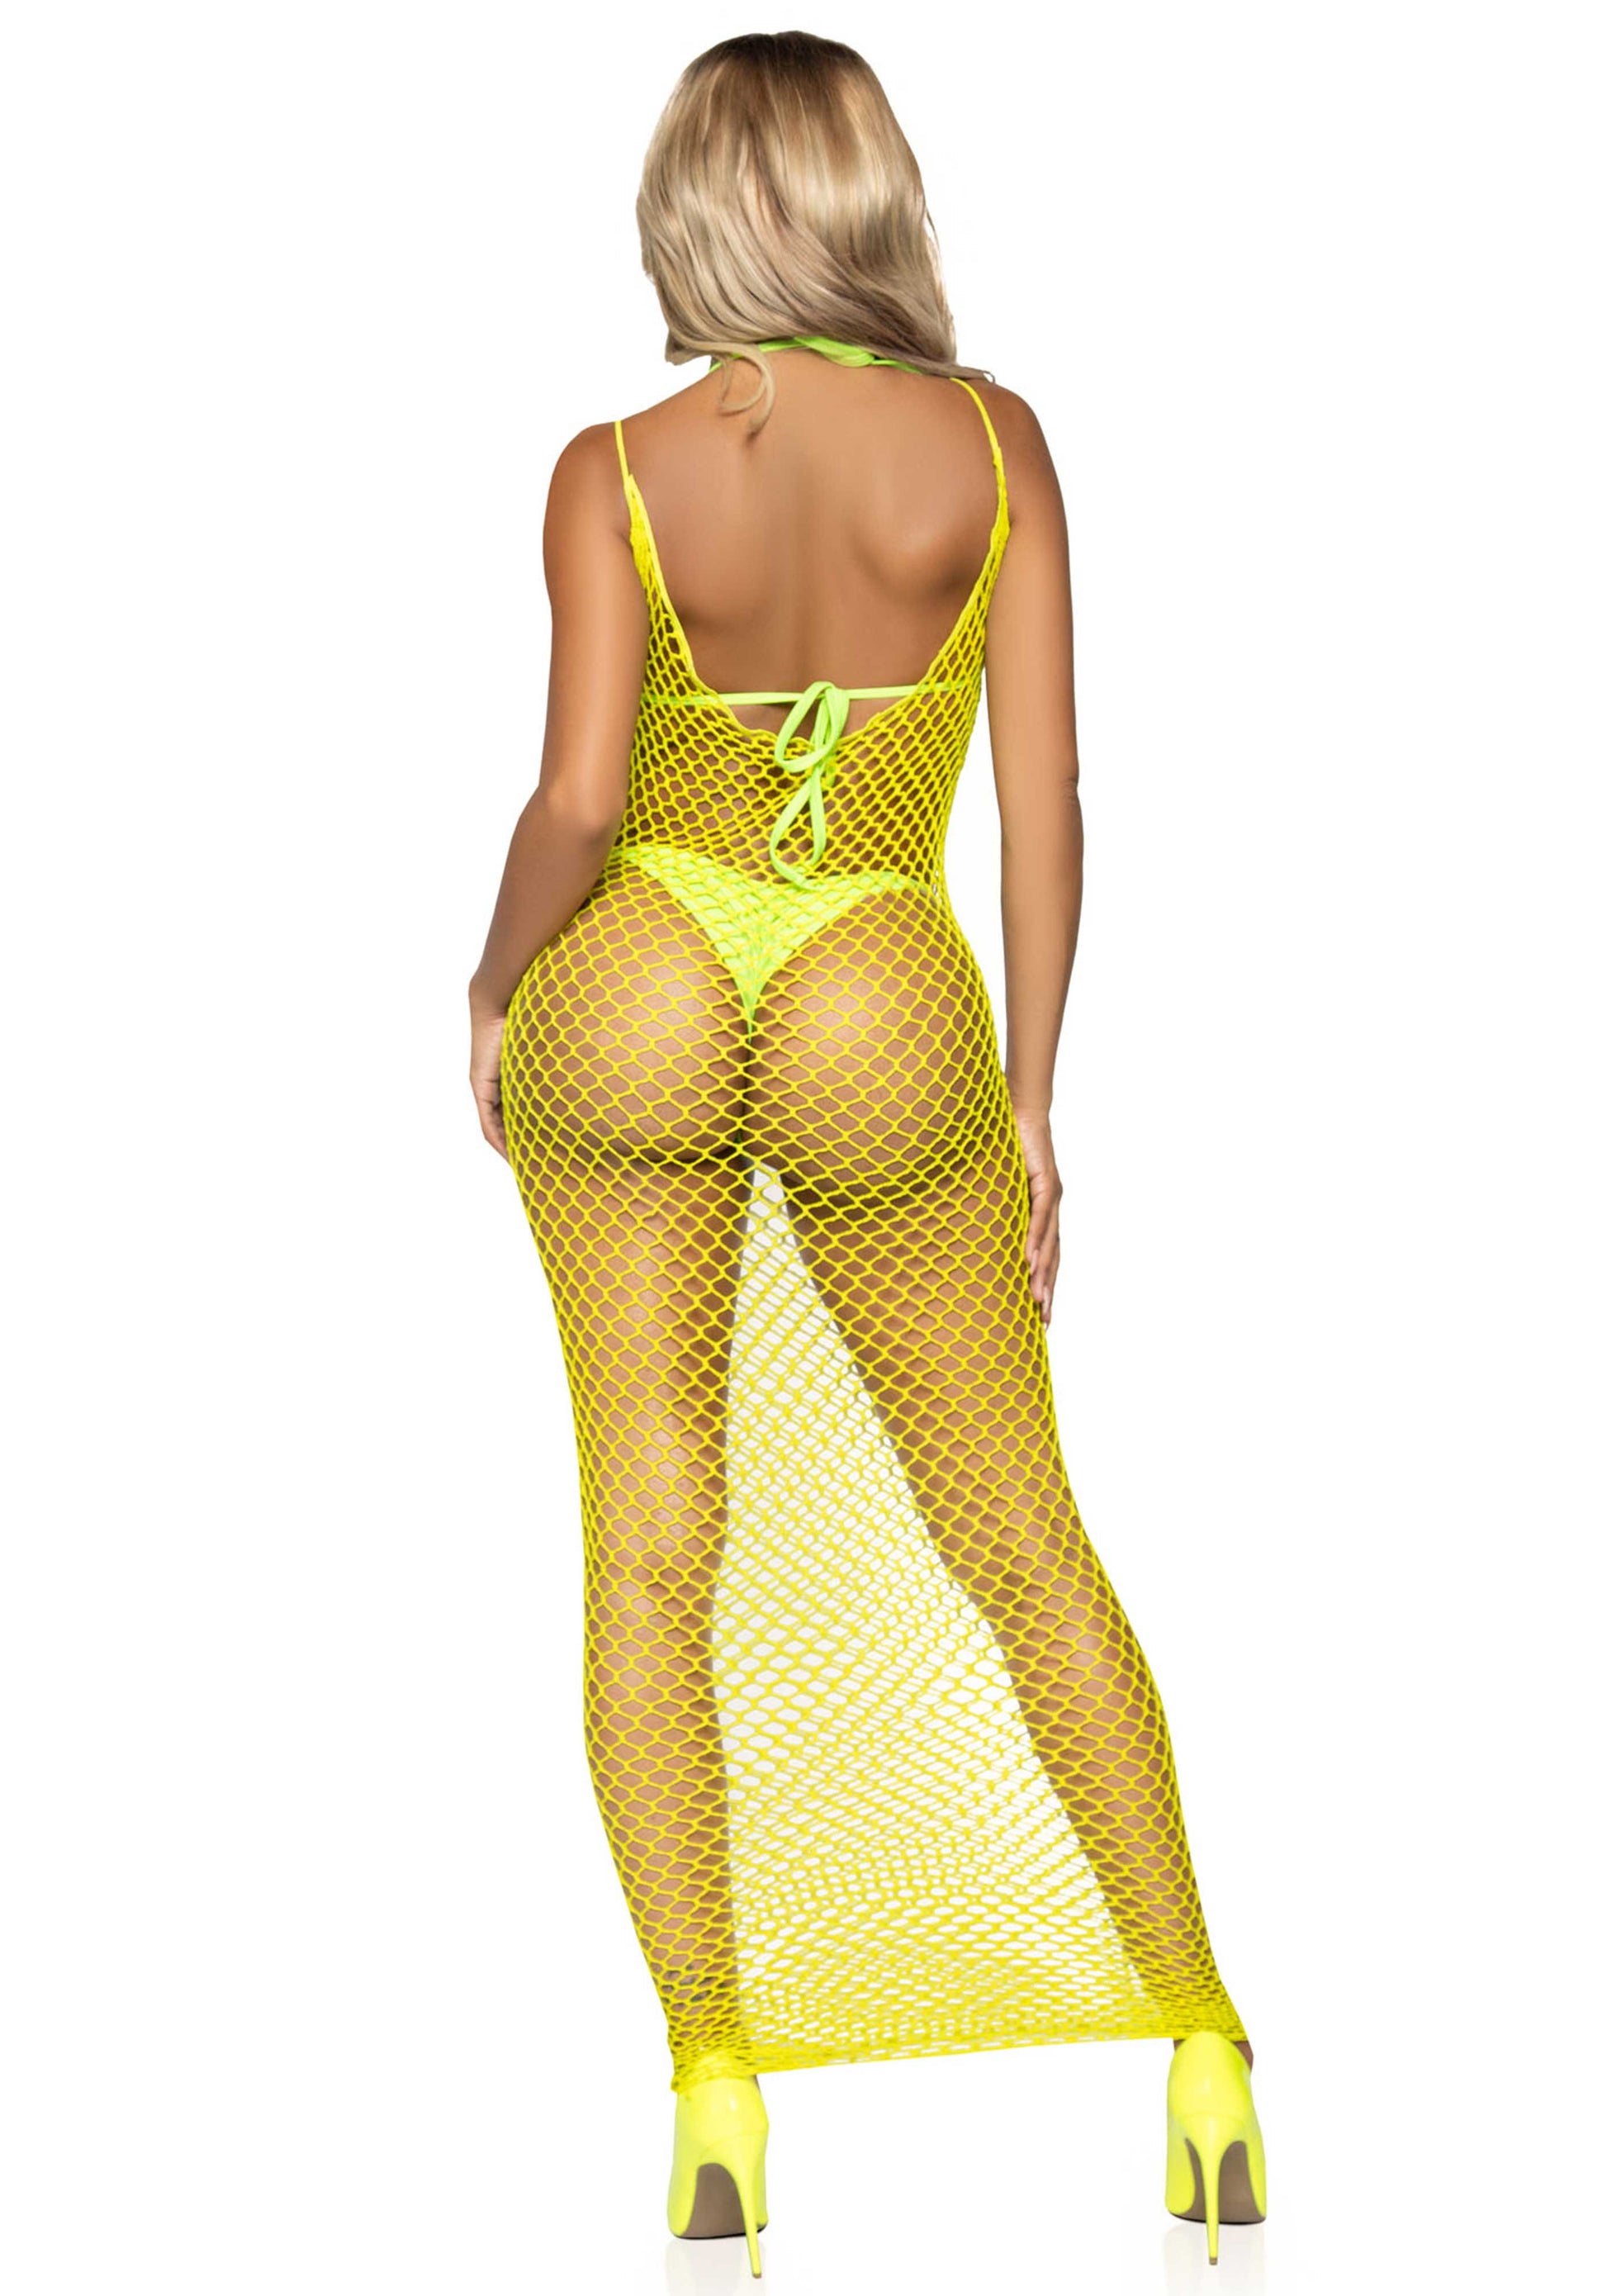 Leg Avenue 86963 Fishnet Dress - Lemon yellow woven thick twist net maxi dress with elasticated straps and low back. Perfect for layering with beachwear or for festivals.